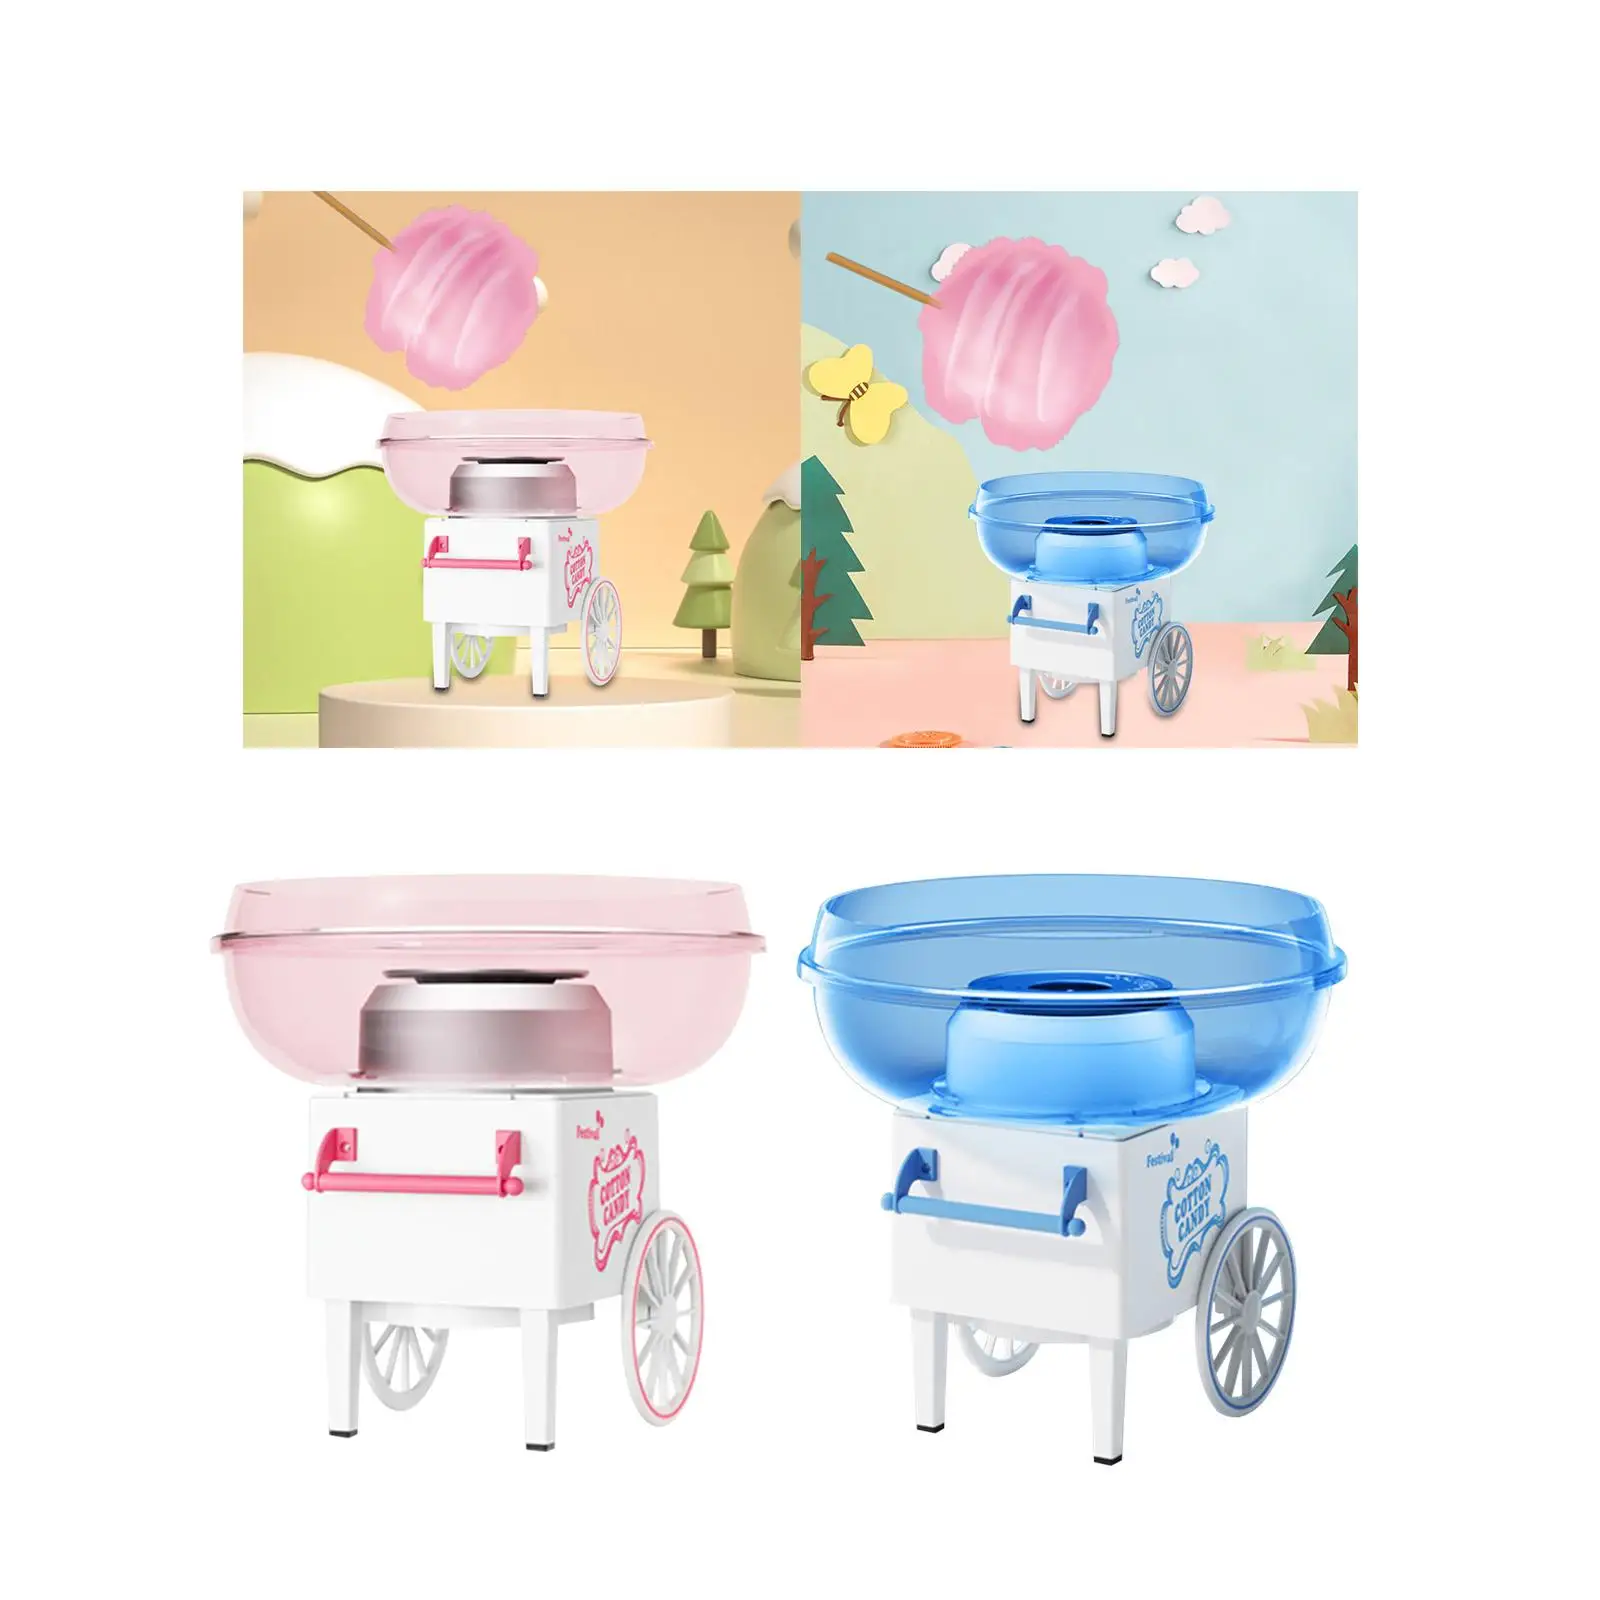 Hard Candy Maker 450W Candy Machine Candy Maker Candy Floss Machine Cart for Festival DIY Tools Party Gift Household